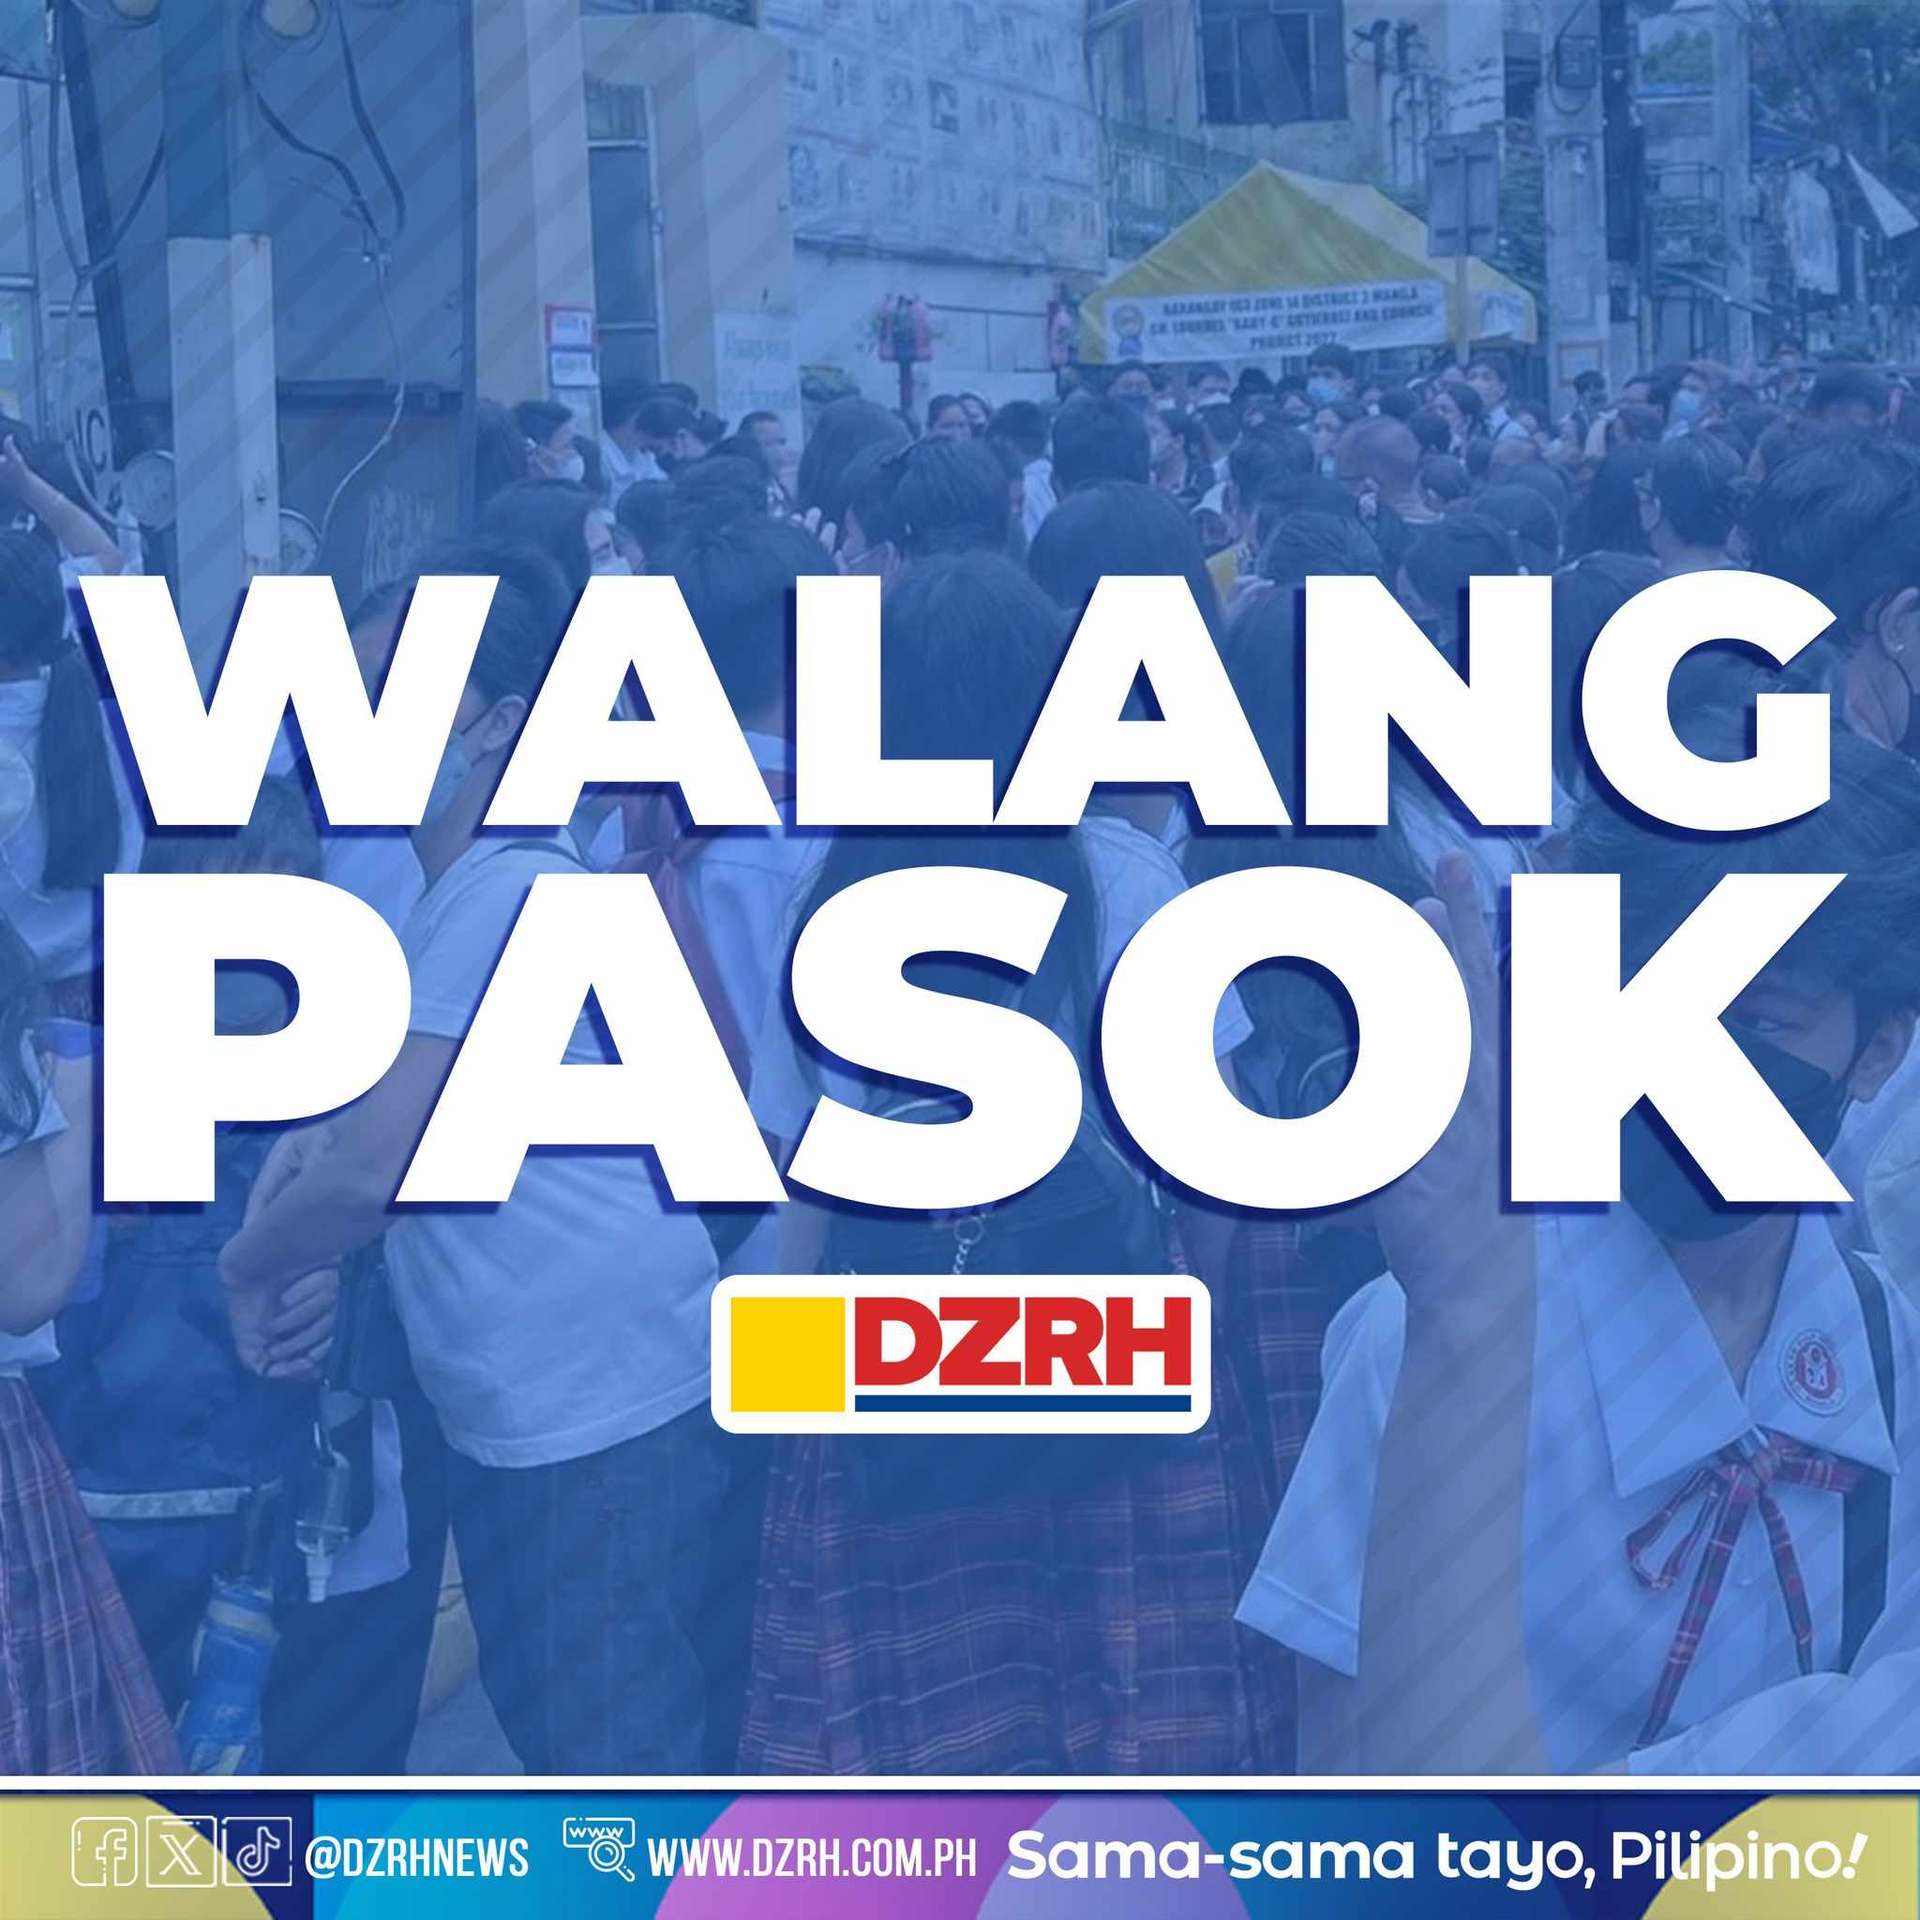 #WalangPasok: List of class suspensions on Tuesday, July 23